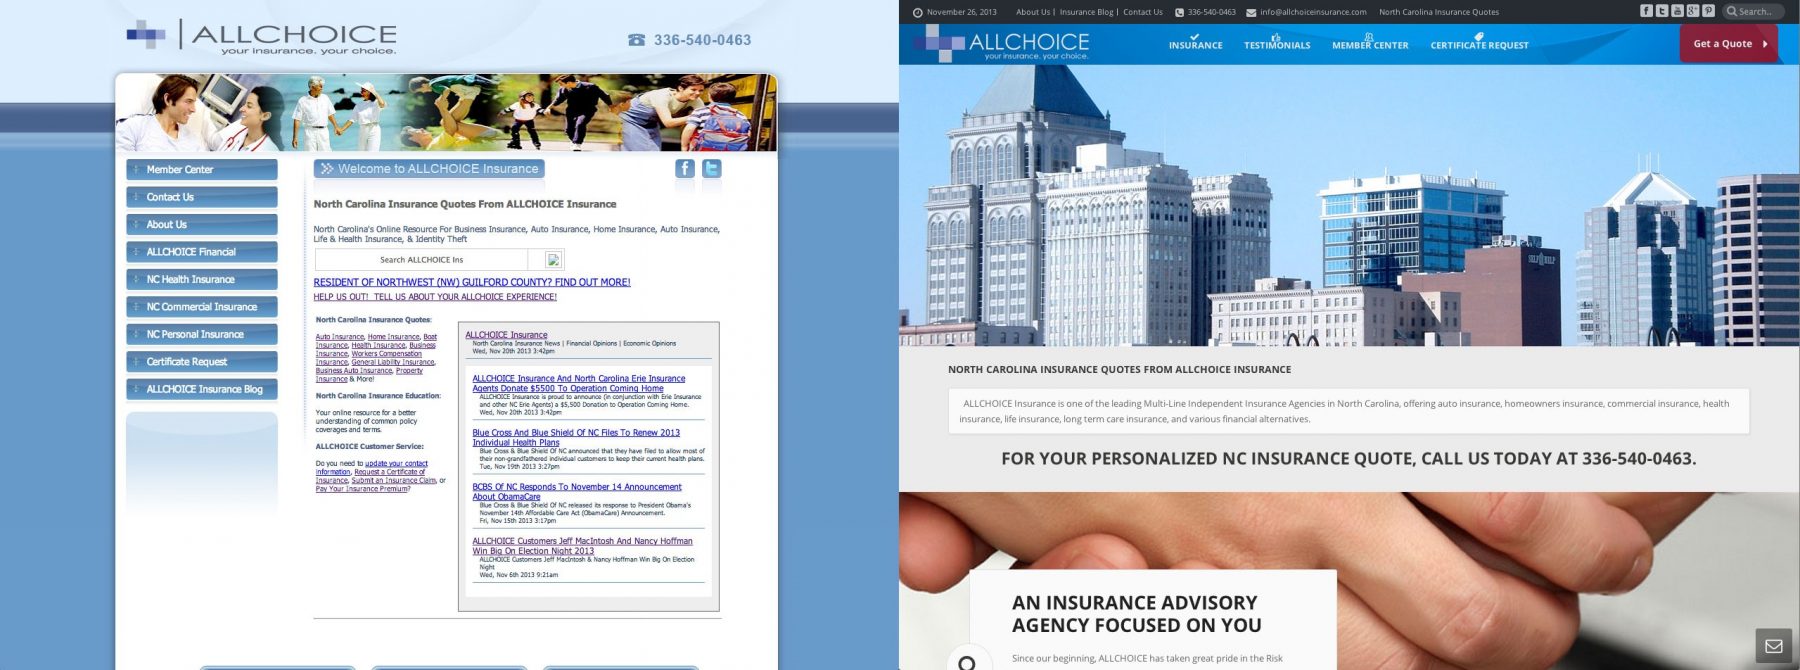 ALLCHOICE-Insurance-Website-Before-And-After-2013